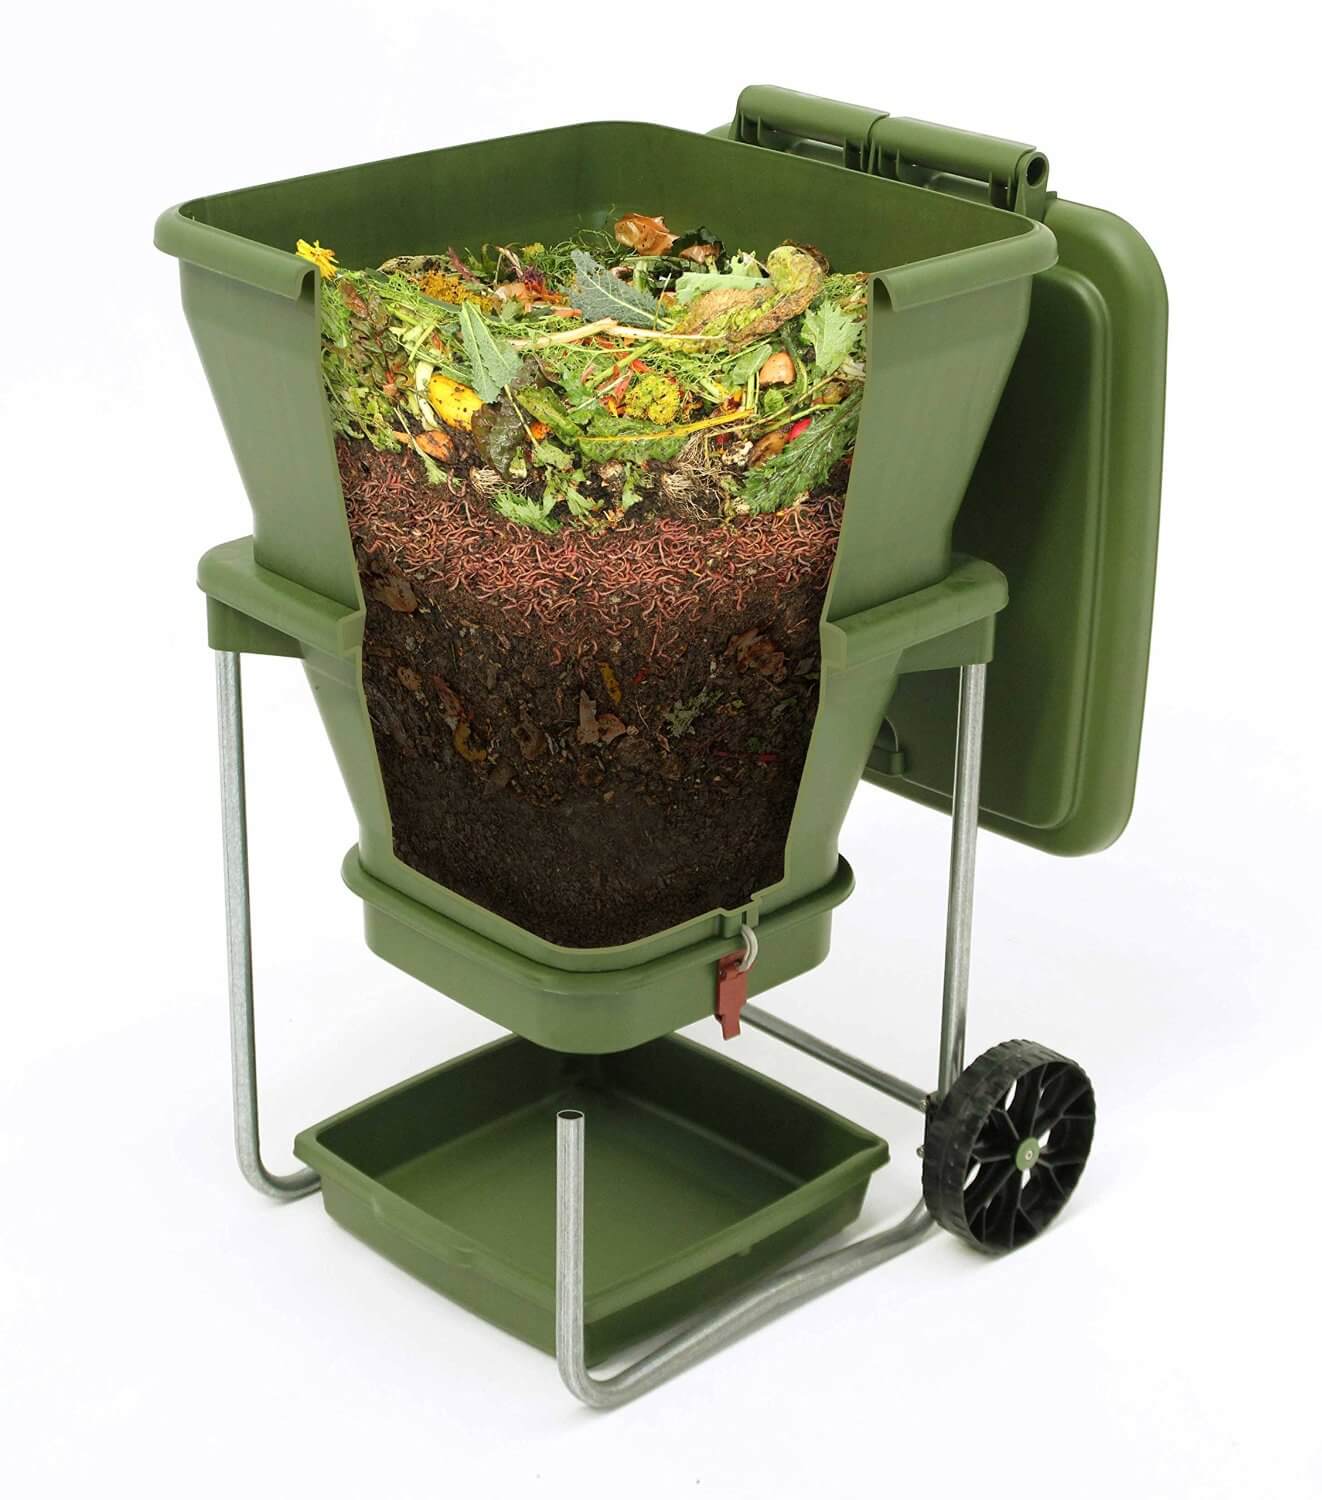 A side angle of the Hungry Bin worm composter with the inside of the compost shown.